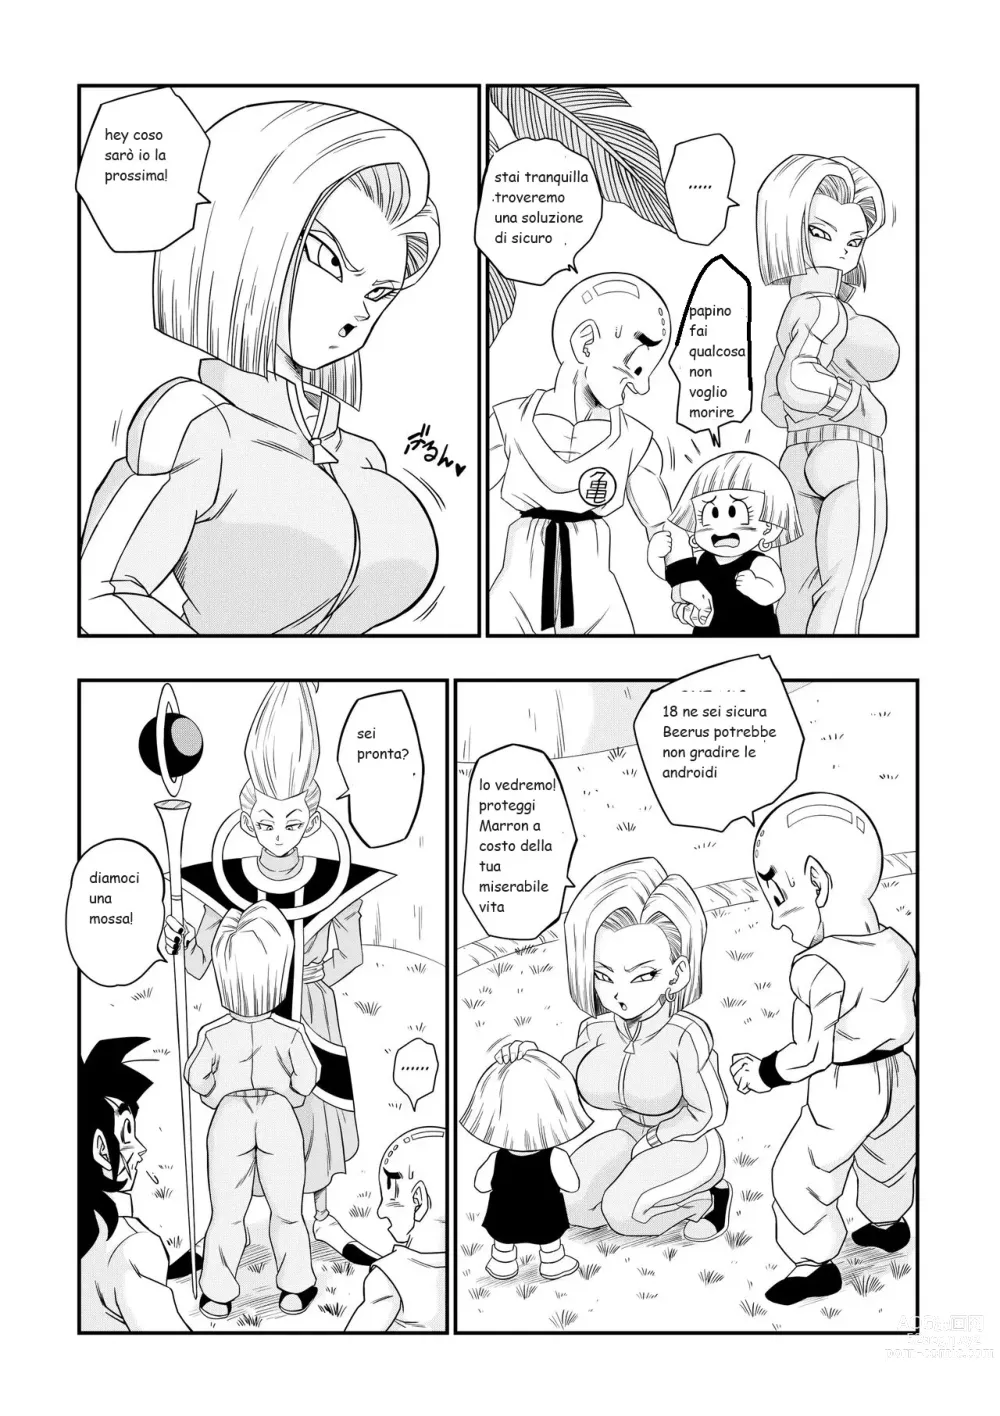 Page 11 of doujinshi nessuno disobbedisce a lord beerus